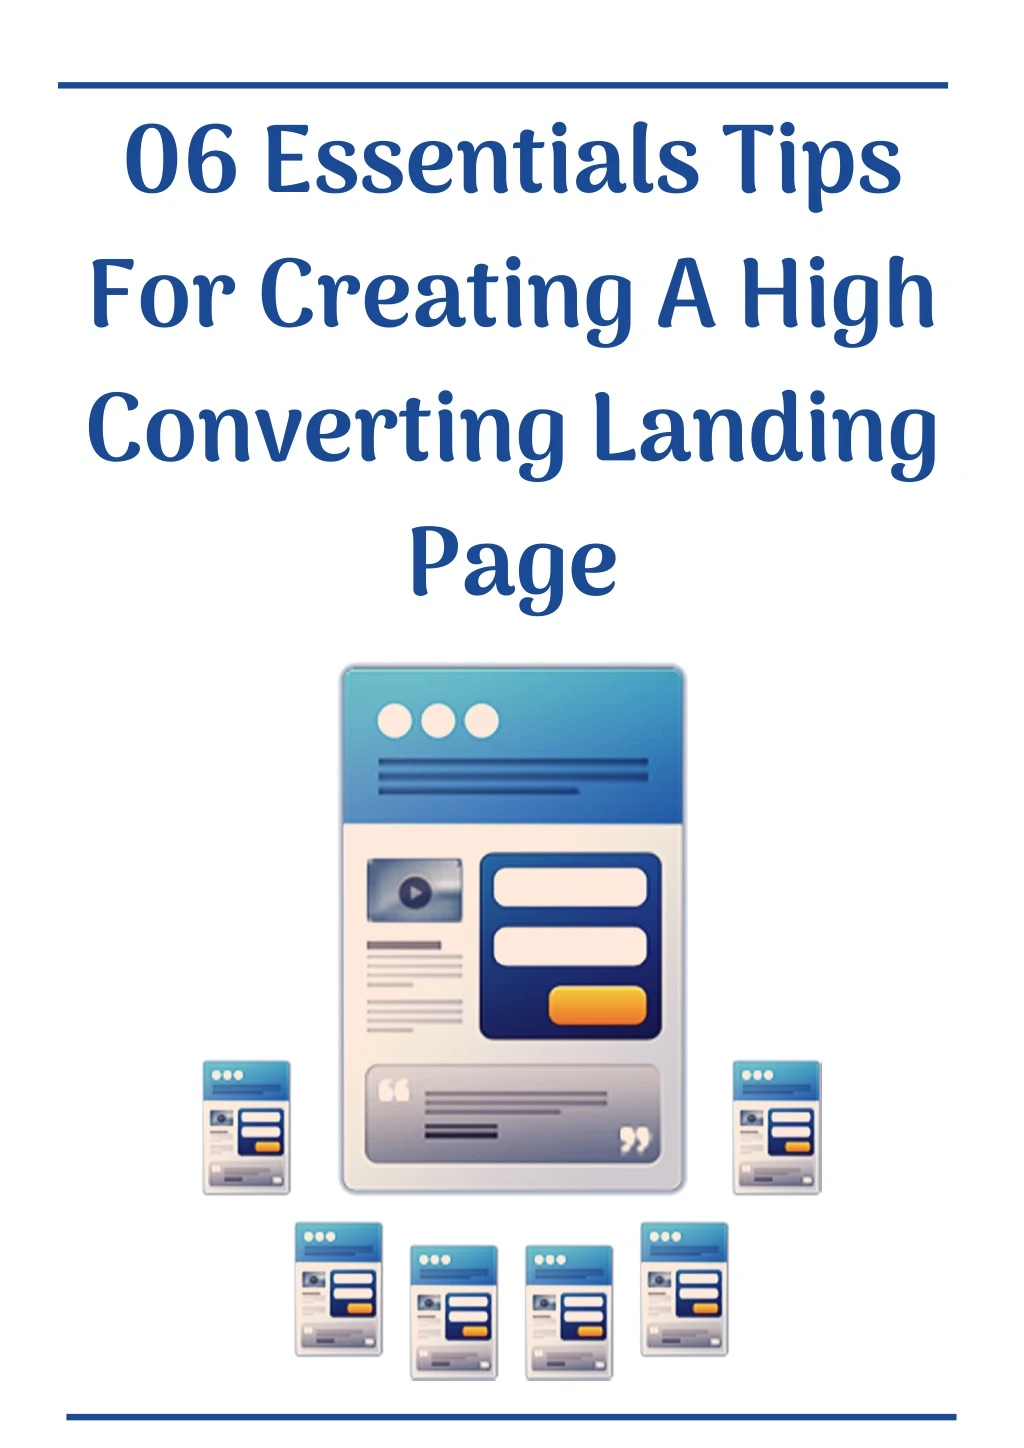 06 essentials tips for creating a high converting